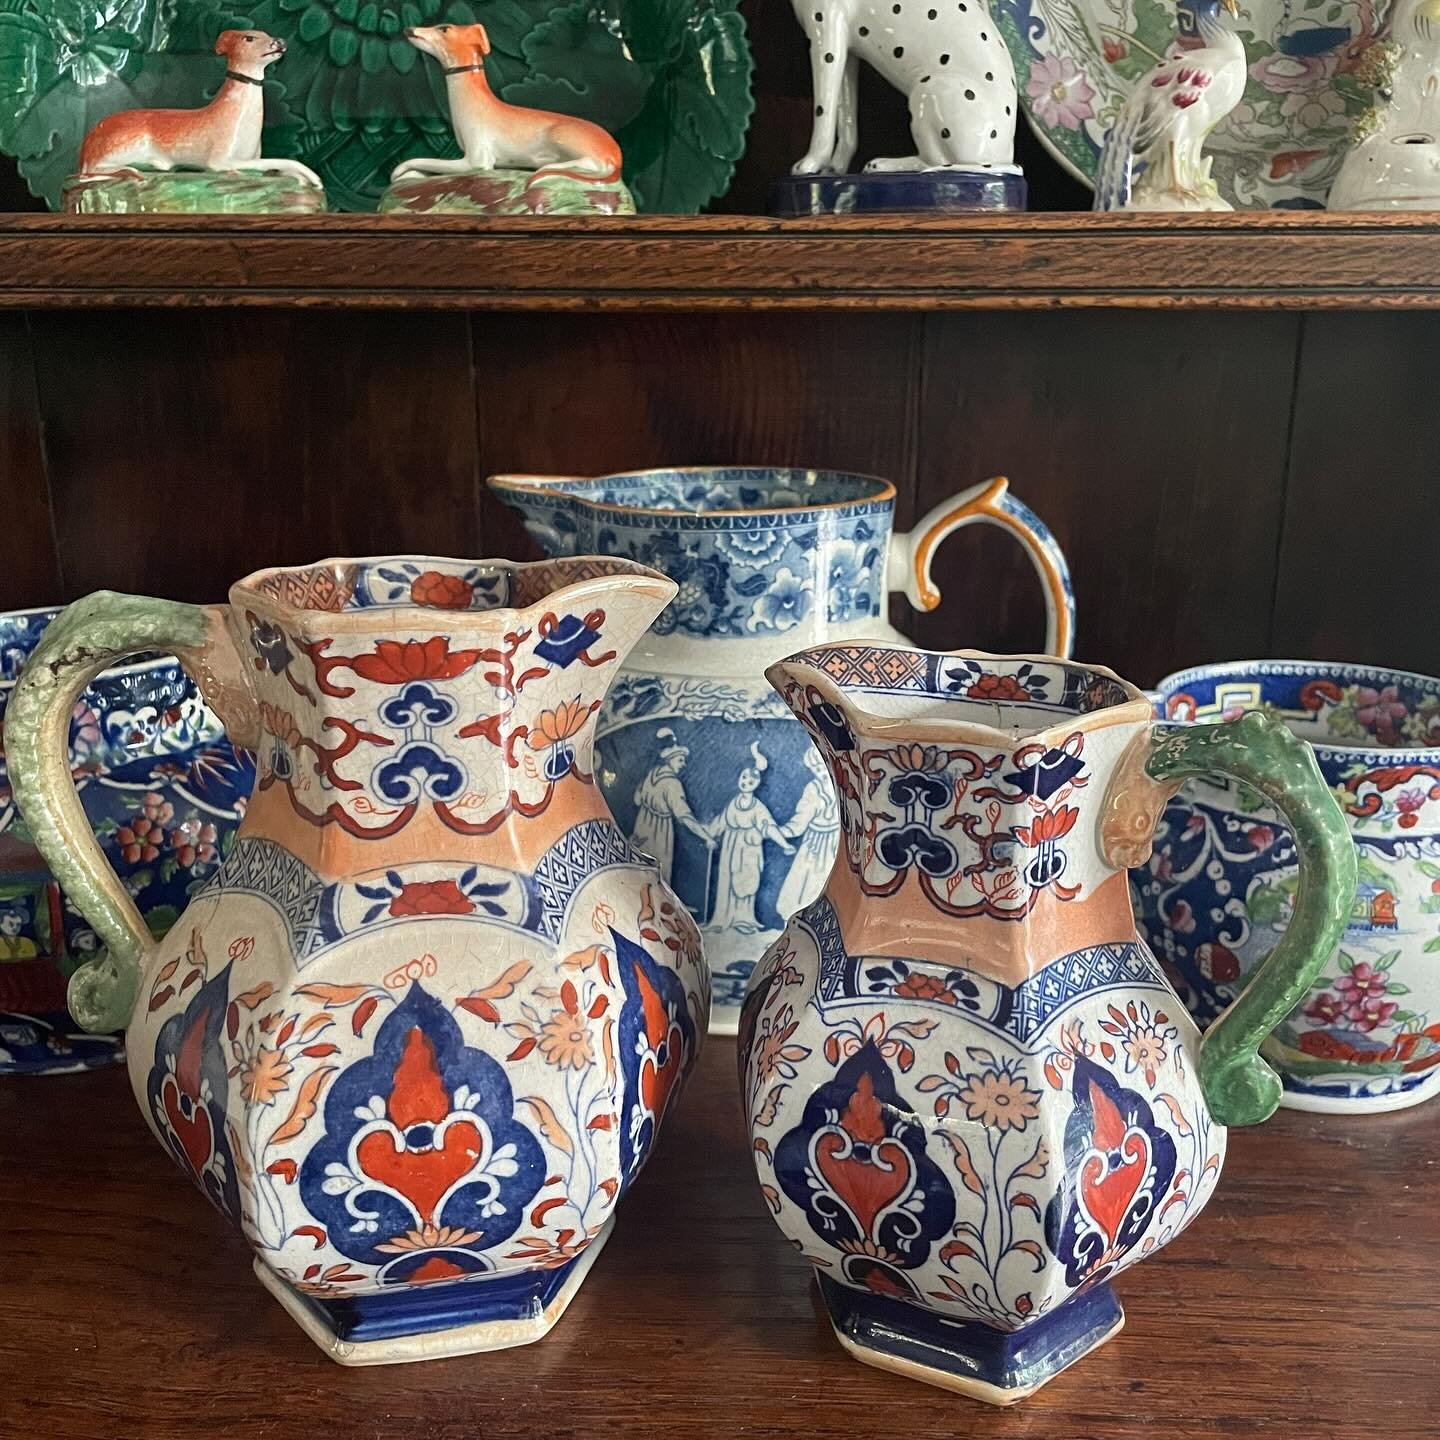 FOR SALE Two striking early 19th century Fenton Stone Works octagonal ironstone jugs. They were made by George &amp; Charles Mason, Staffordshire in around 1825. 

They are richly decorated in a beautiful Imari pattern (No. 306) with serpent handles 